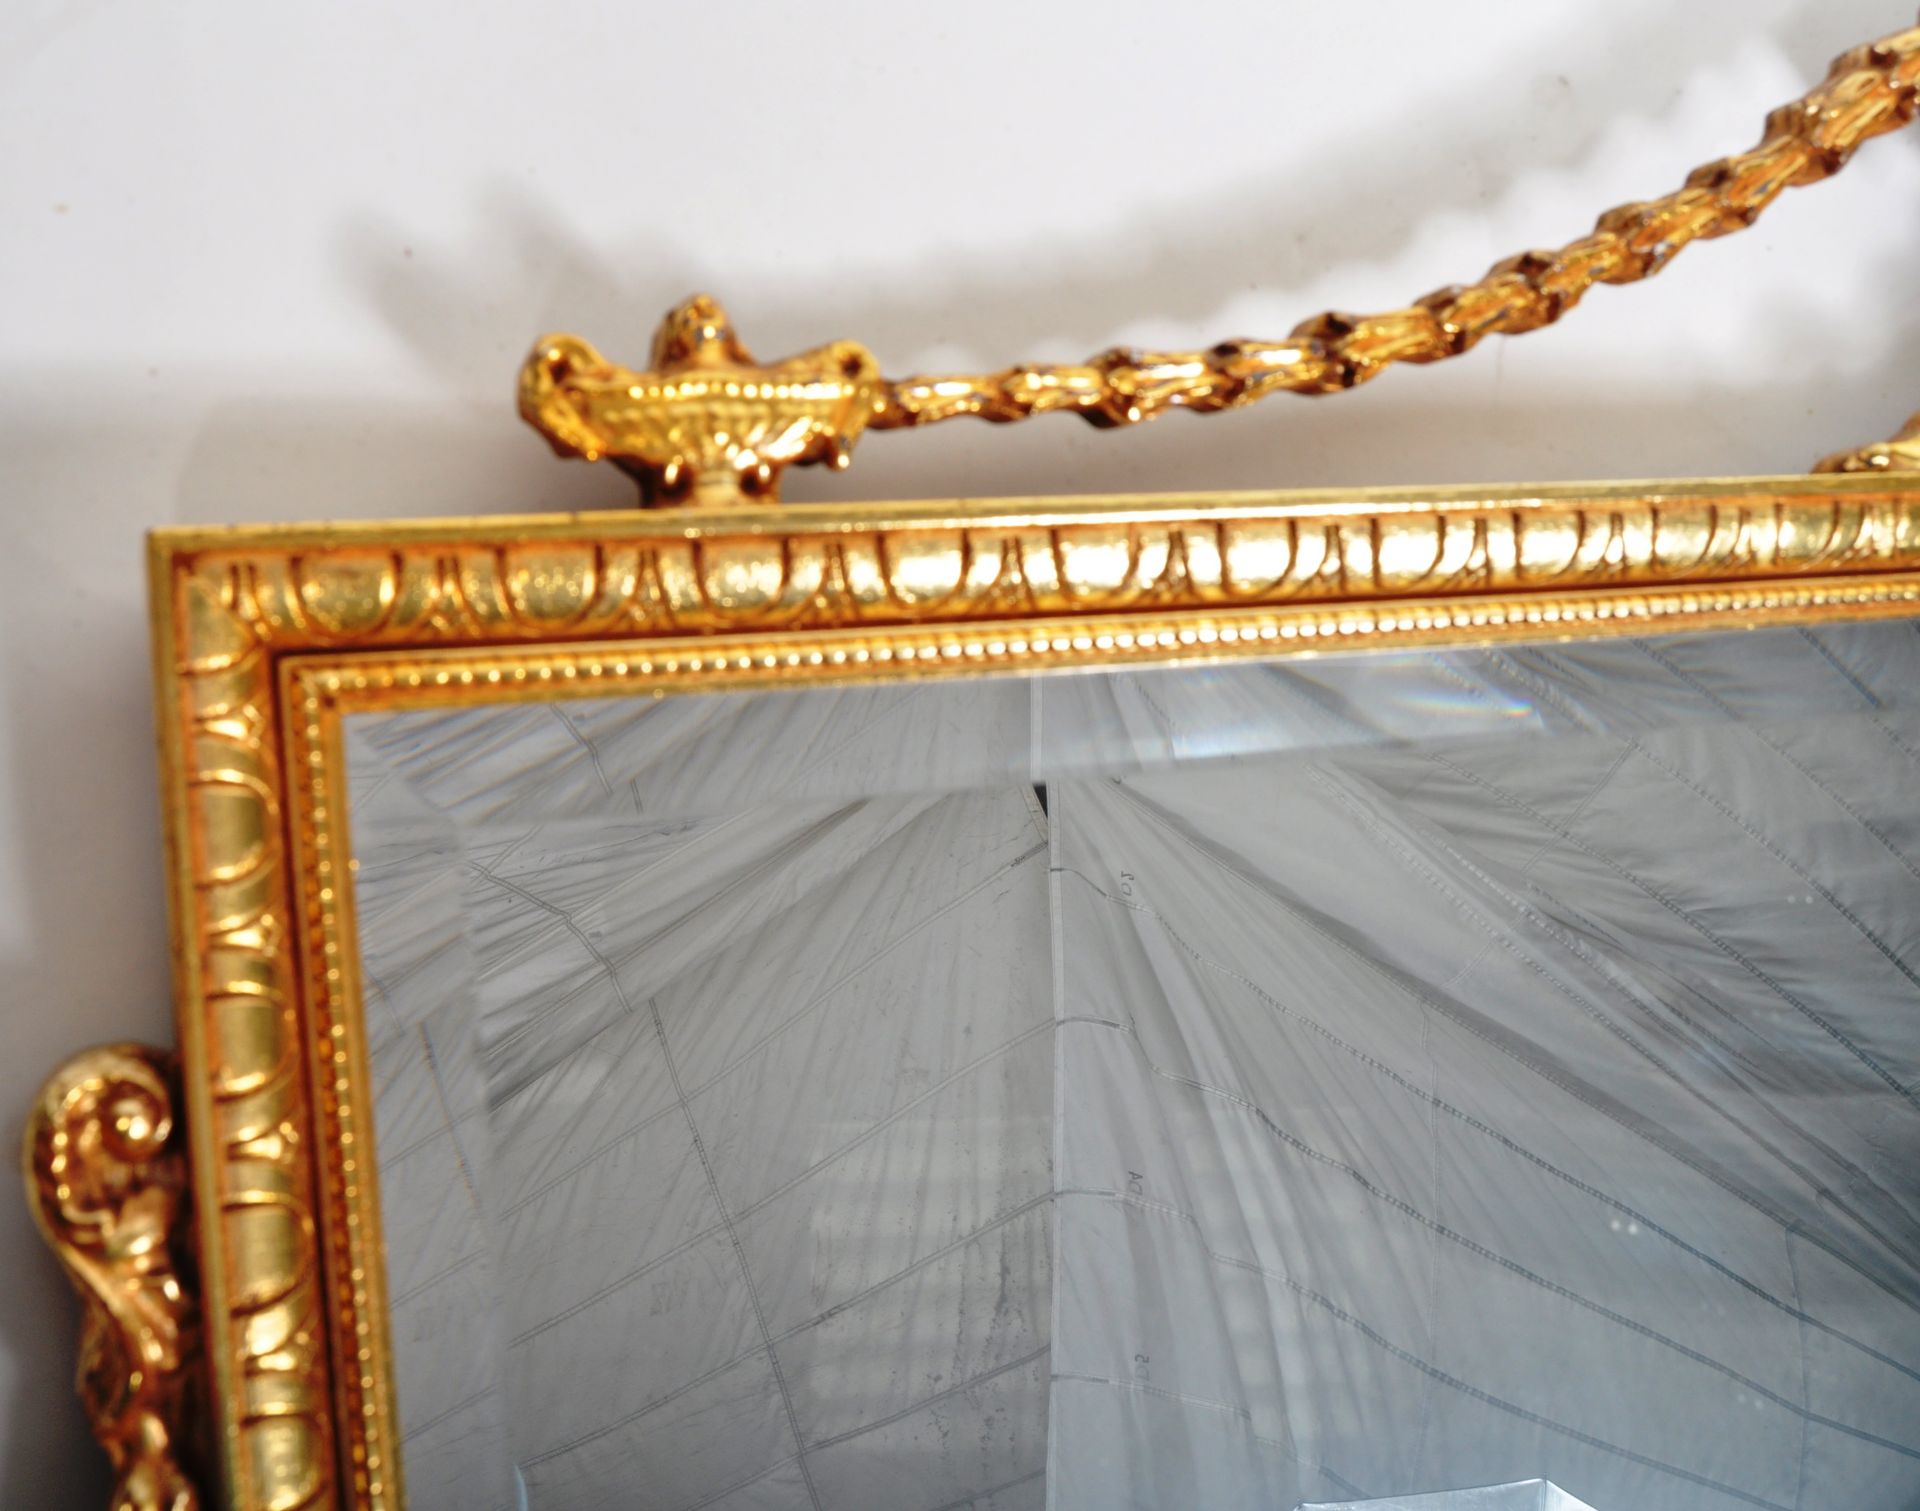 CONTEMPORARY GILT FRAMED HANGING MIRROR - Image 3 of 6